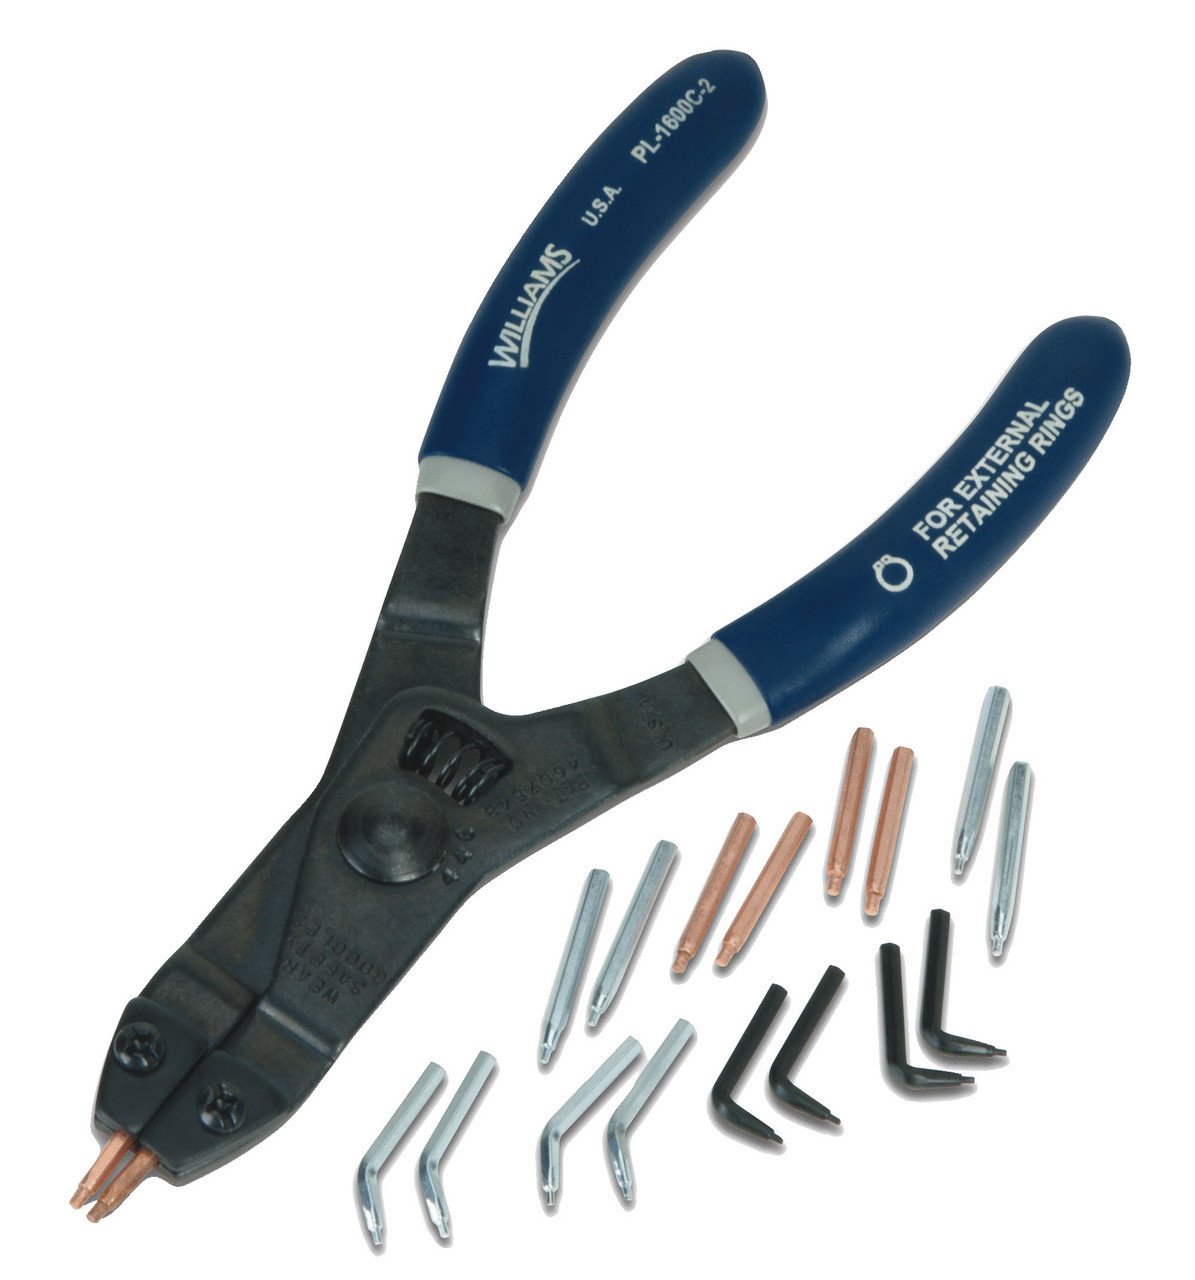 3/32" Williams Retaining Ring External Pliers with Tips - JHWPL-1600C2